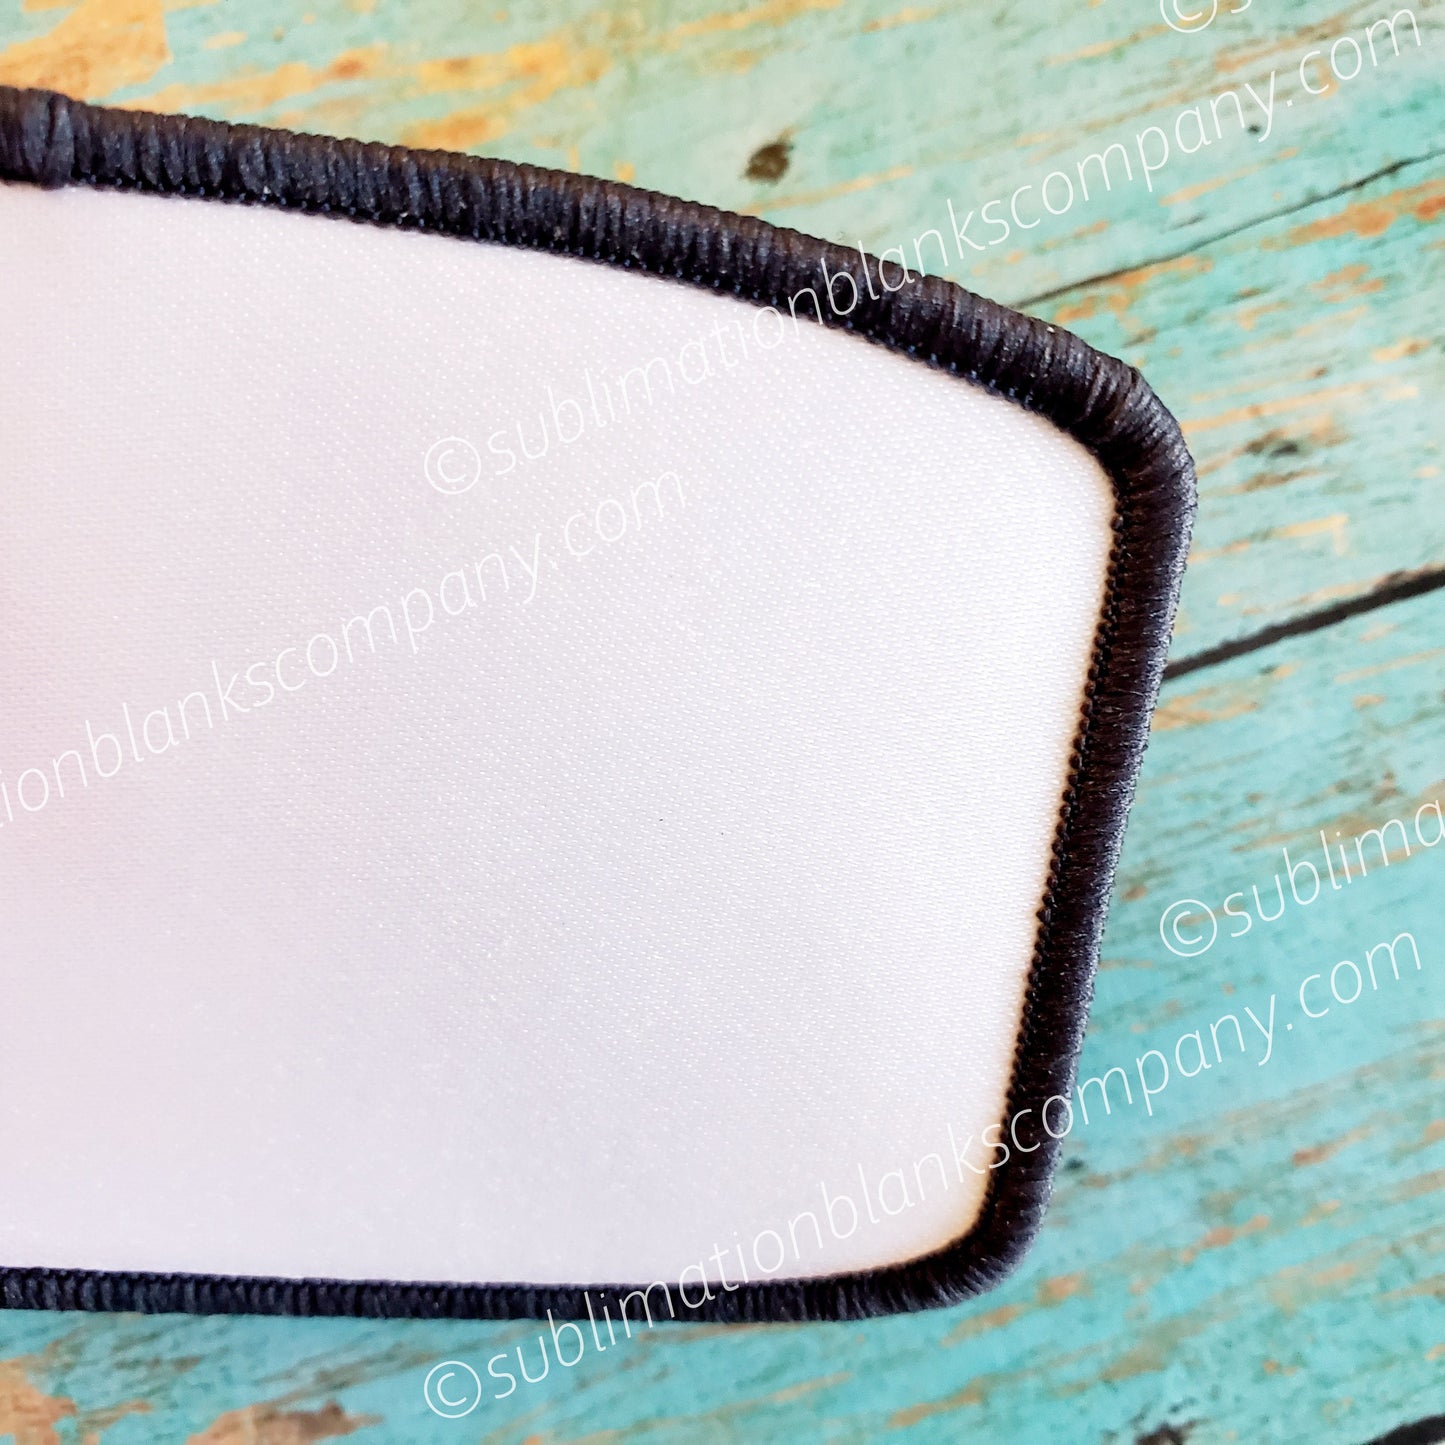 VELCRO Rounded Rectangle and Cirlcle Hat Patch Sublimation Blank! Polyester!